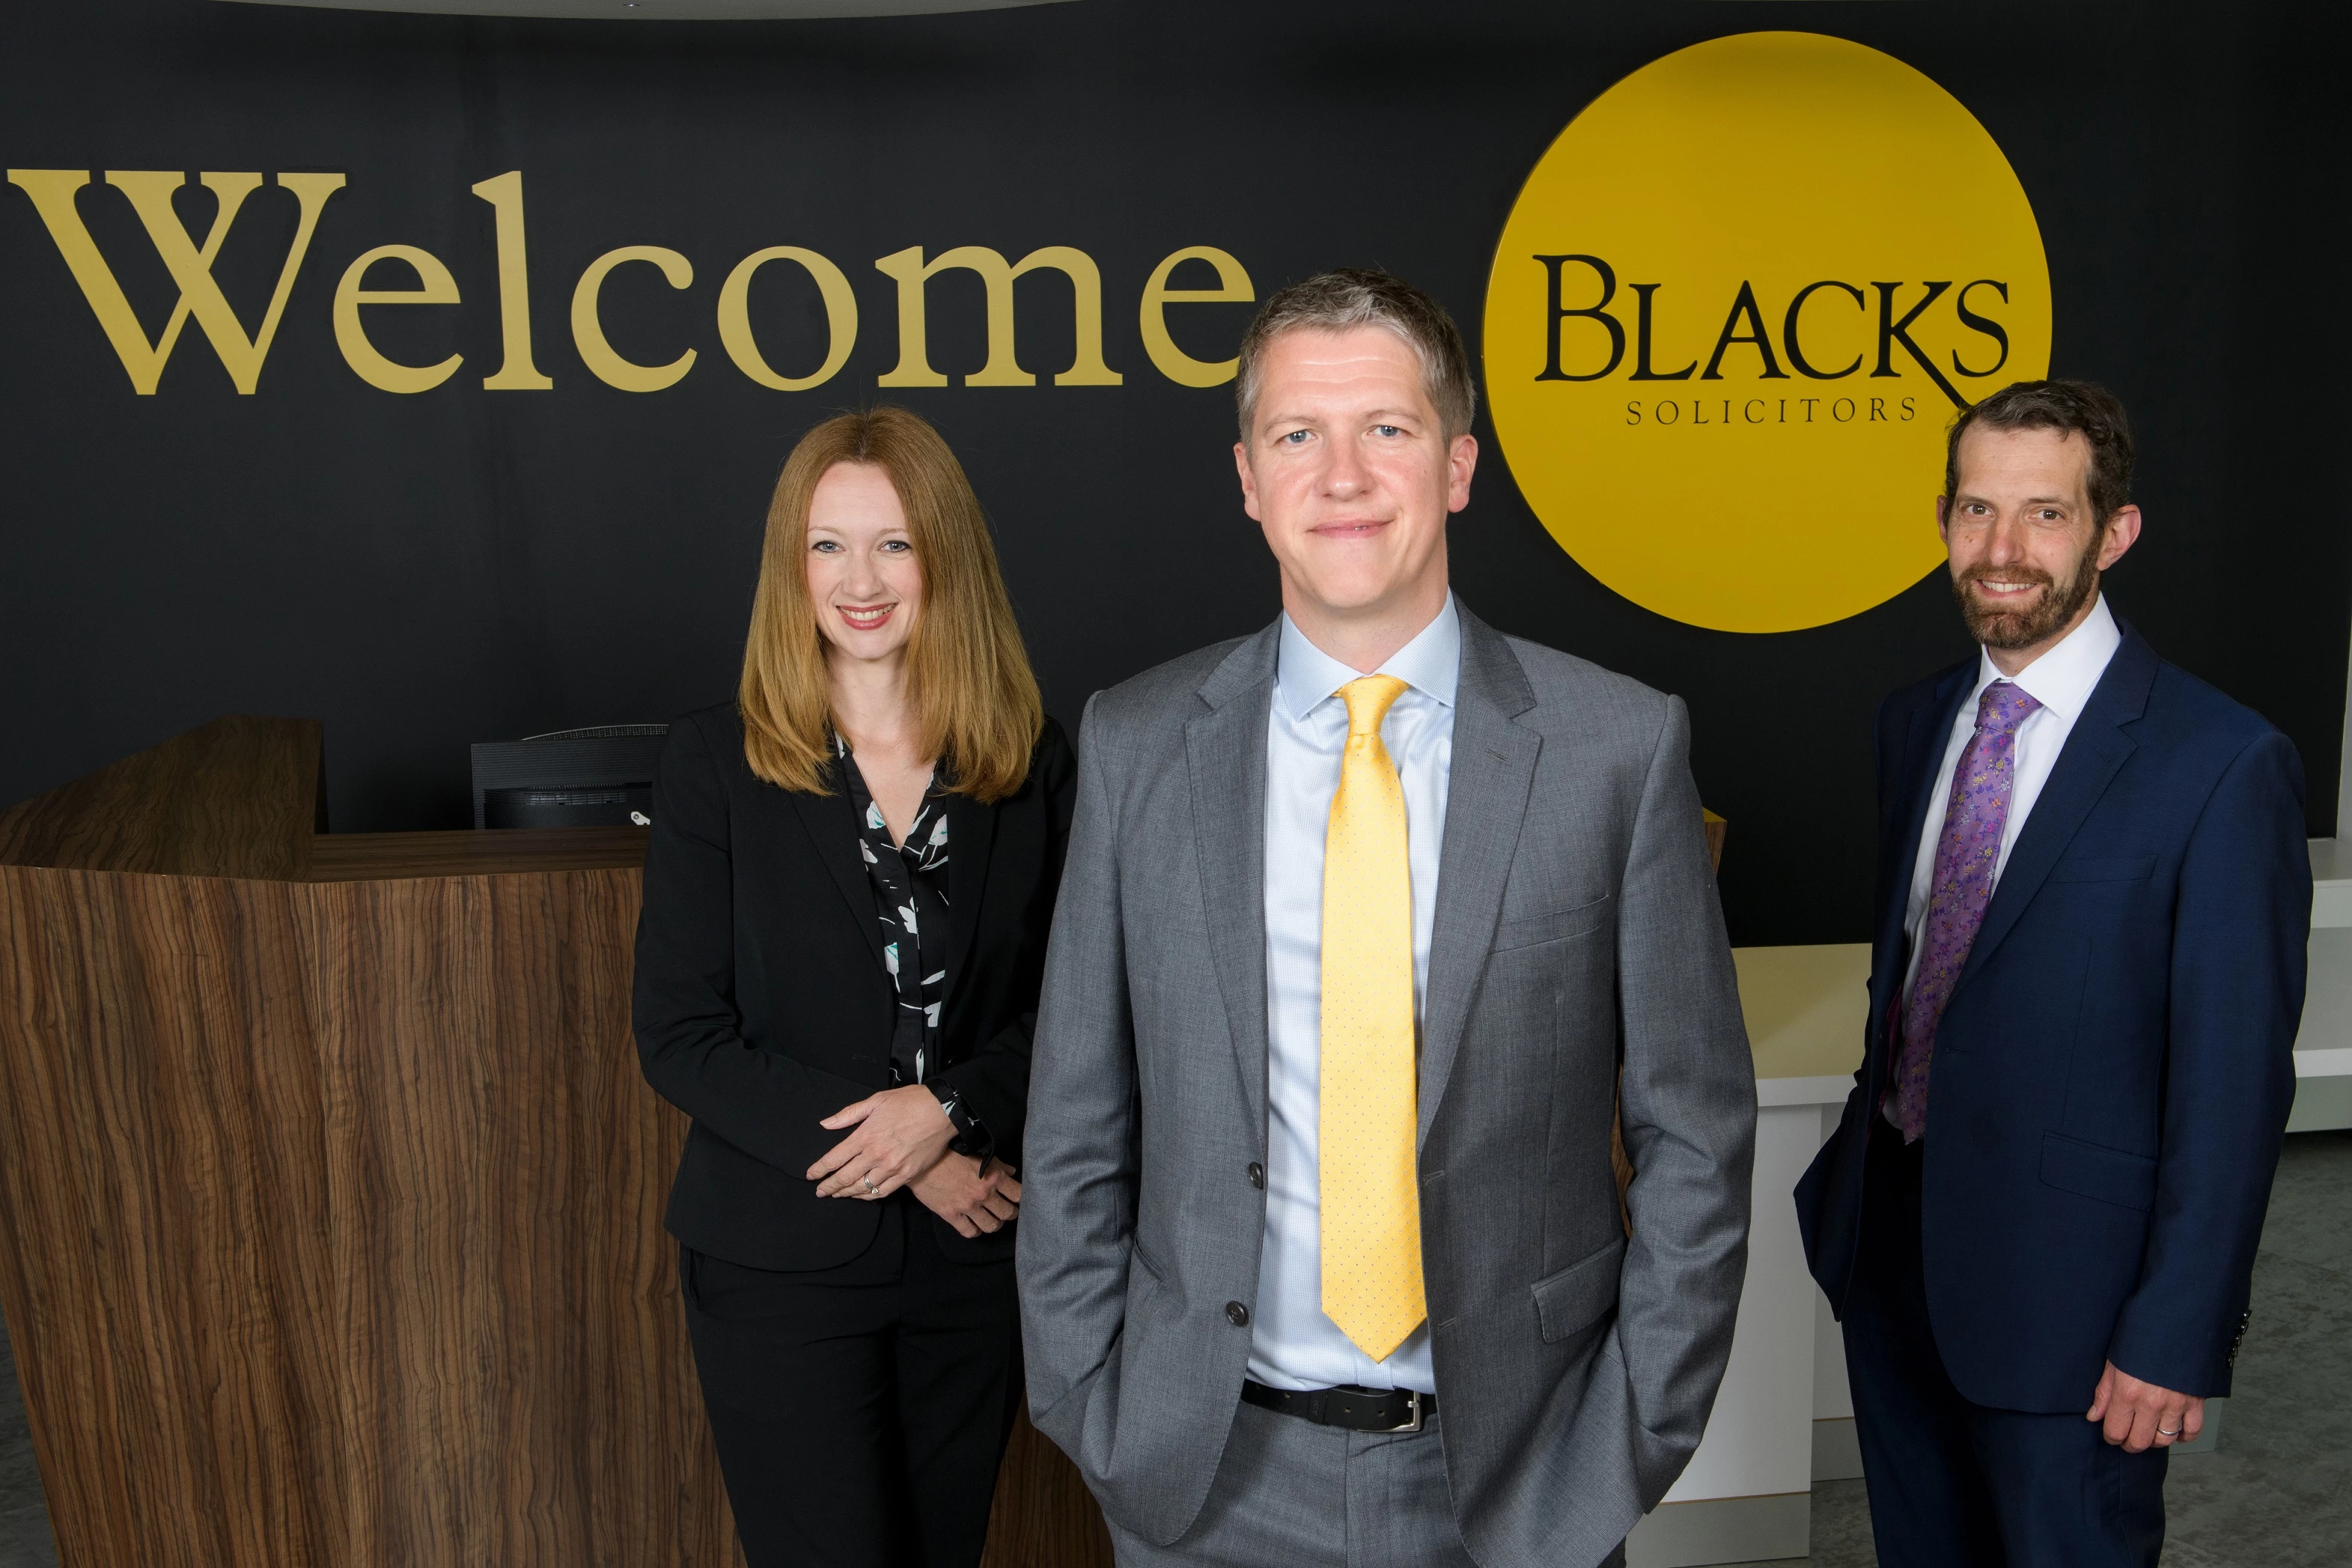 L-R: Katy McPhie (Senior Associate), James Cook (Head of Planning), Nick Dyson (Head of Commercial Property)